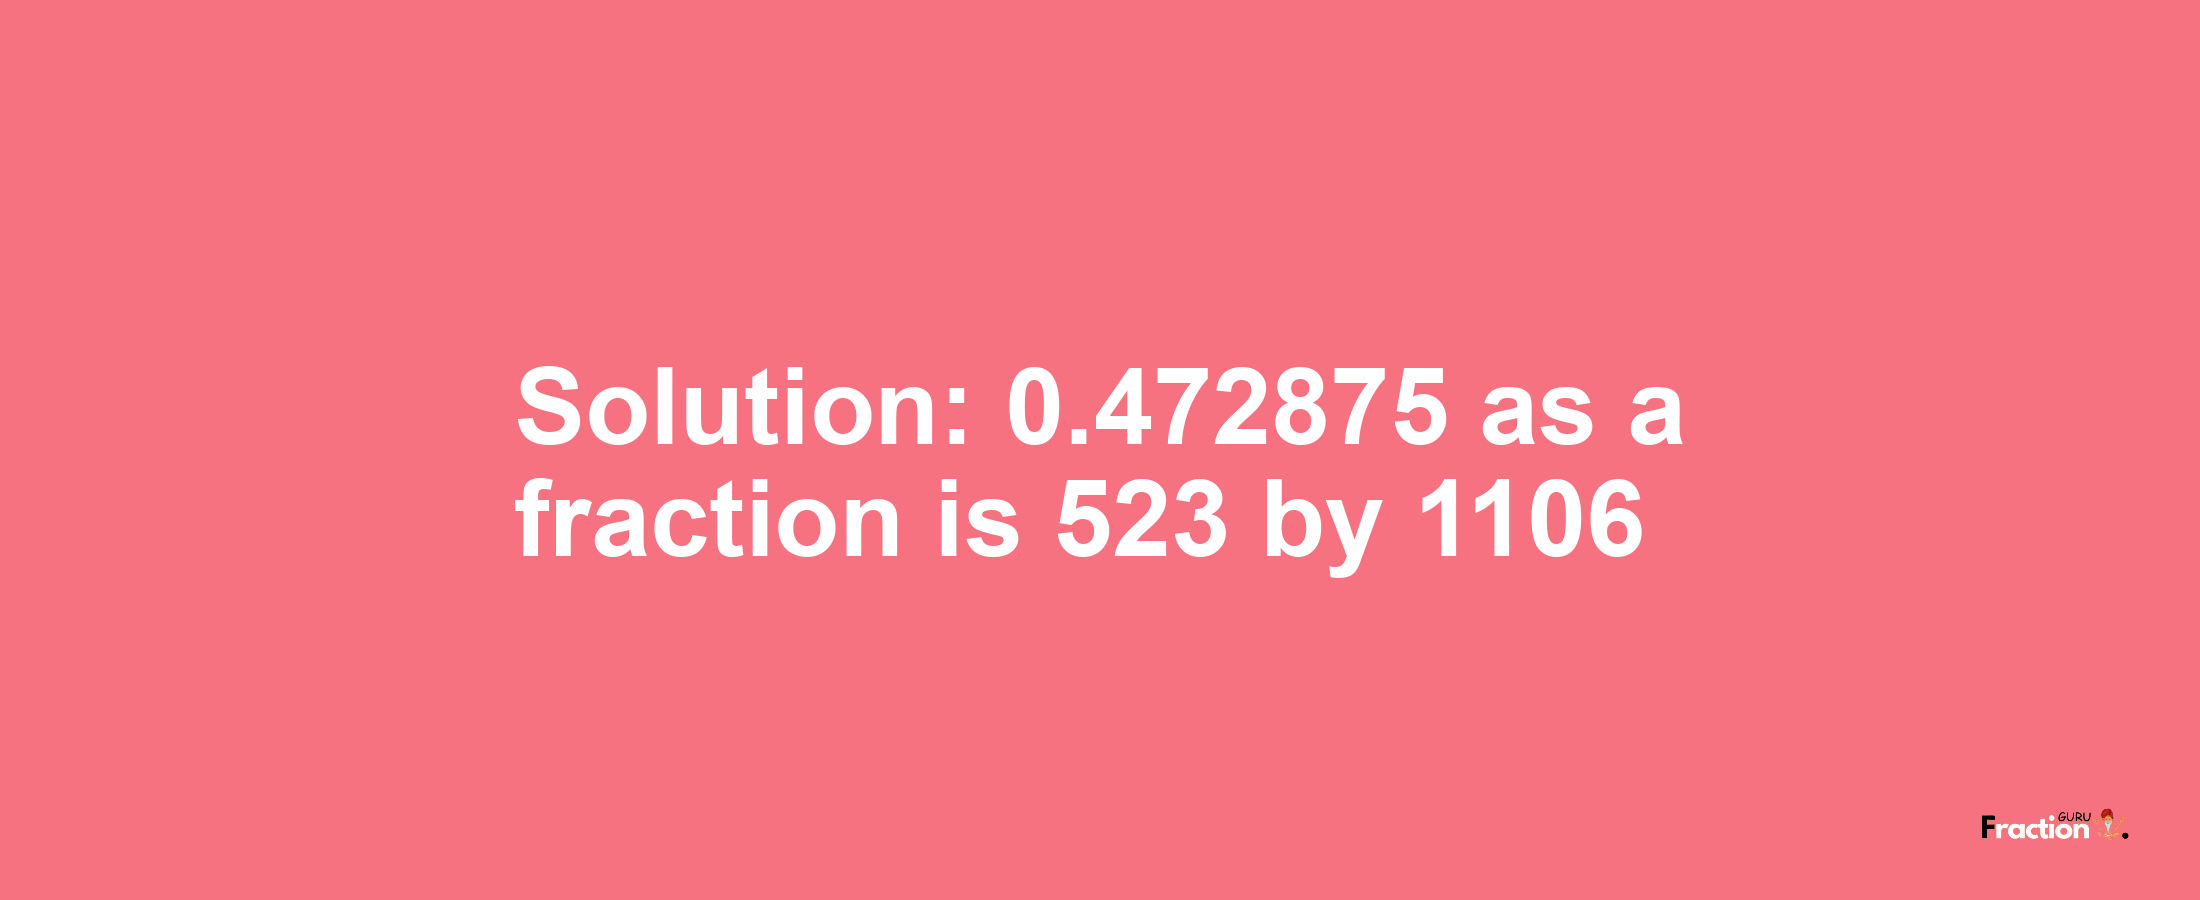 Solution:0.472875 as a fraction is 523/1106